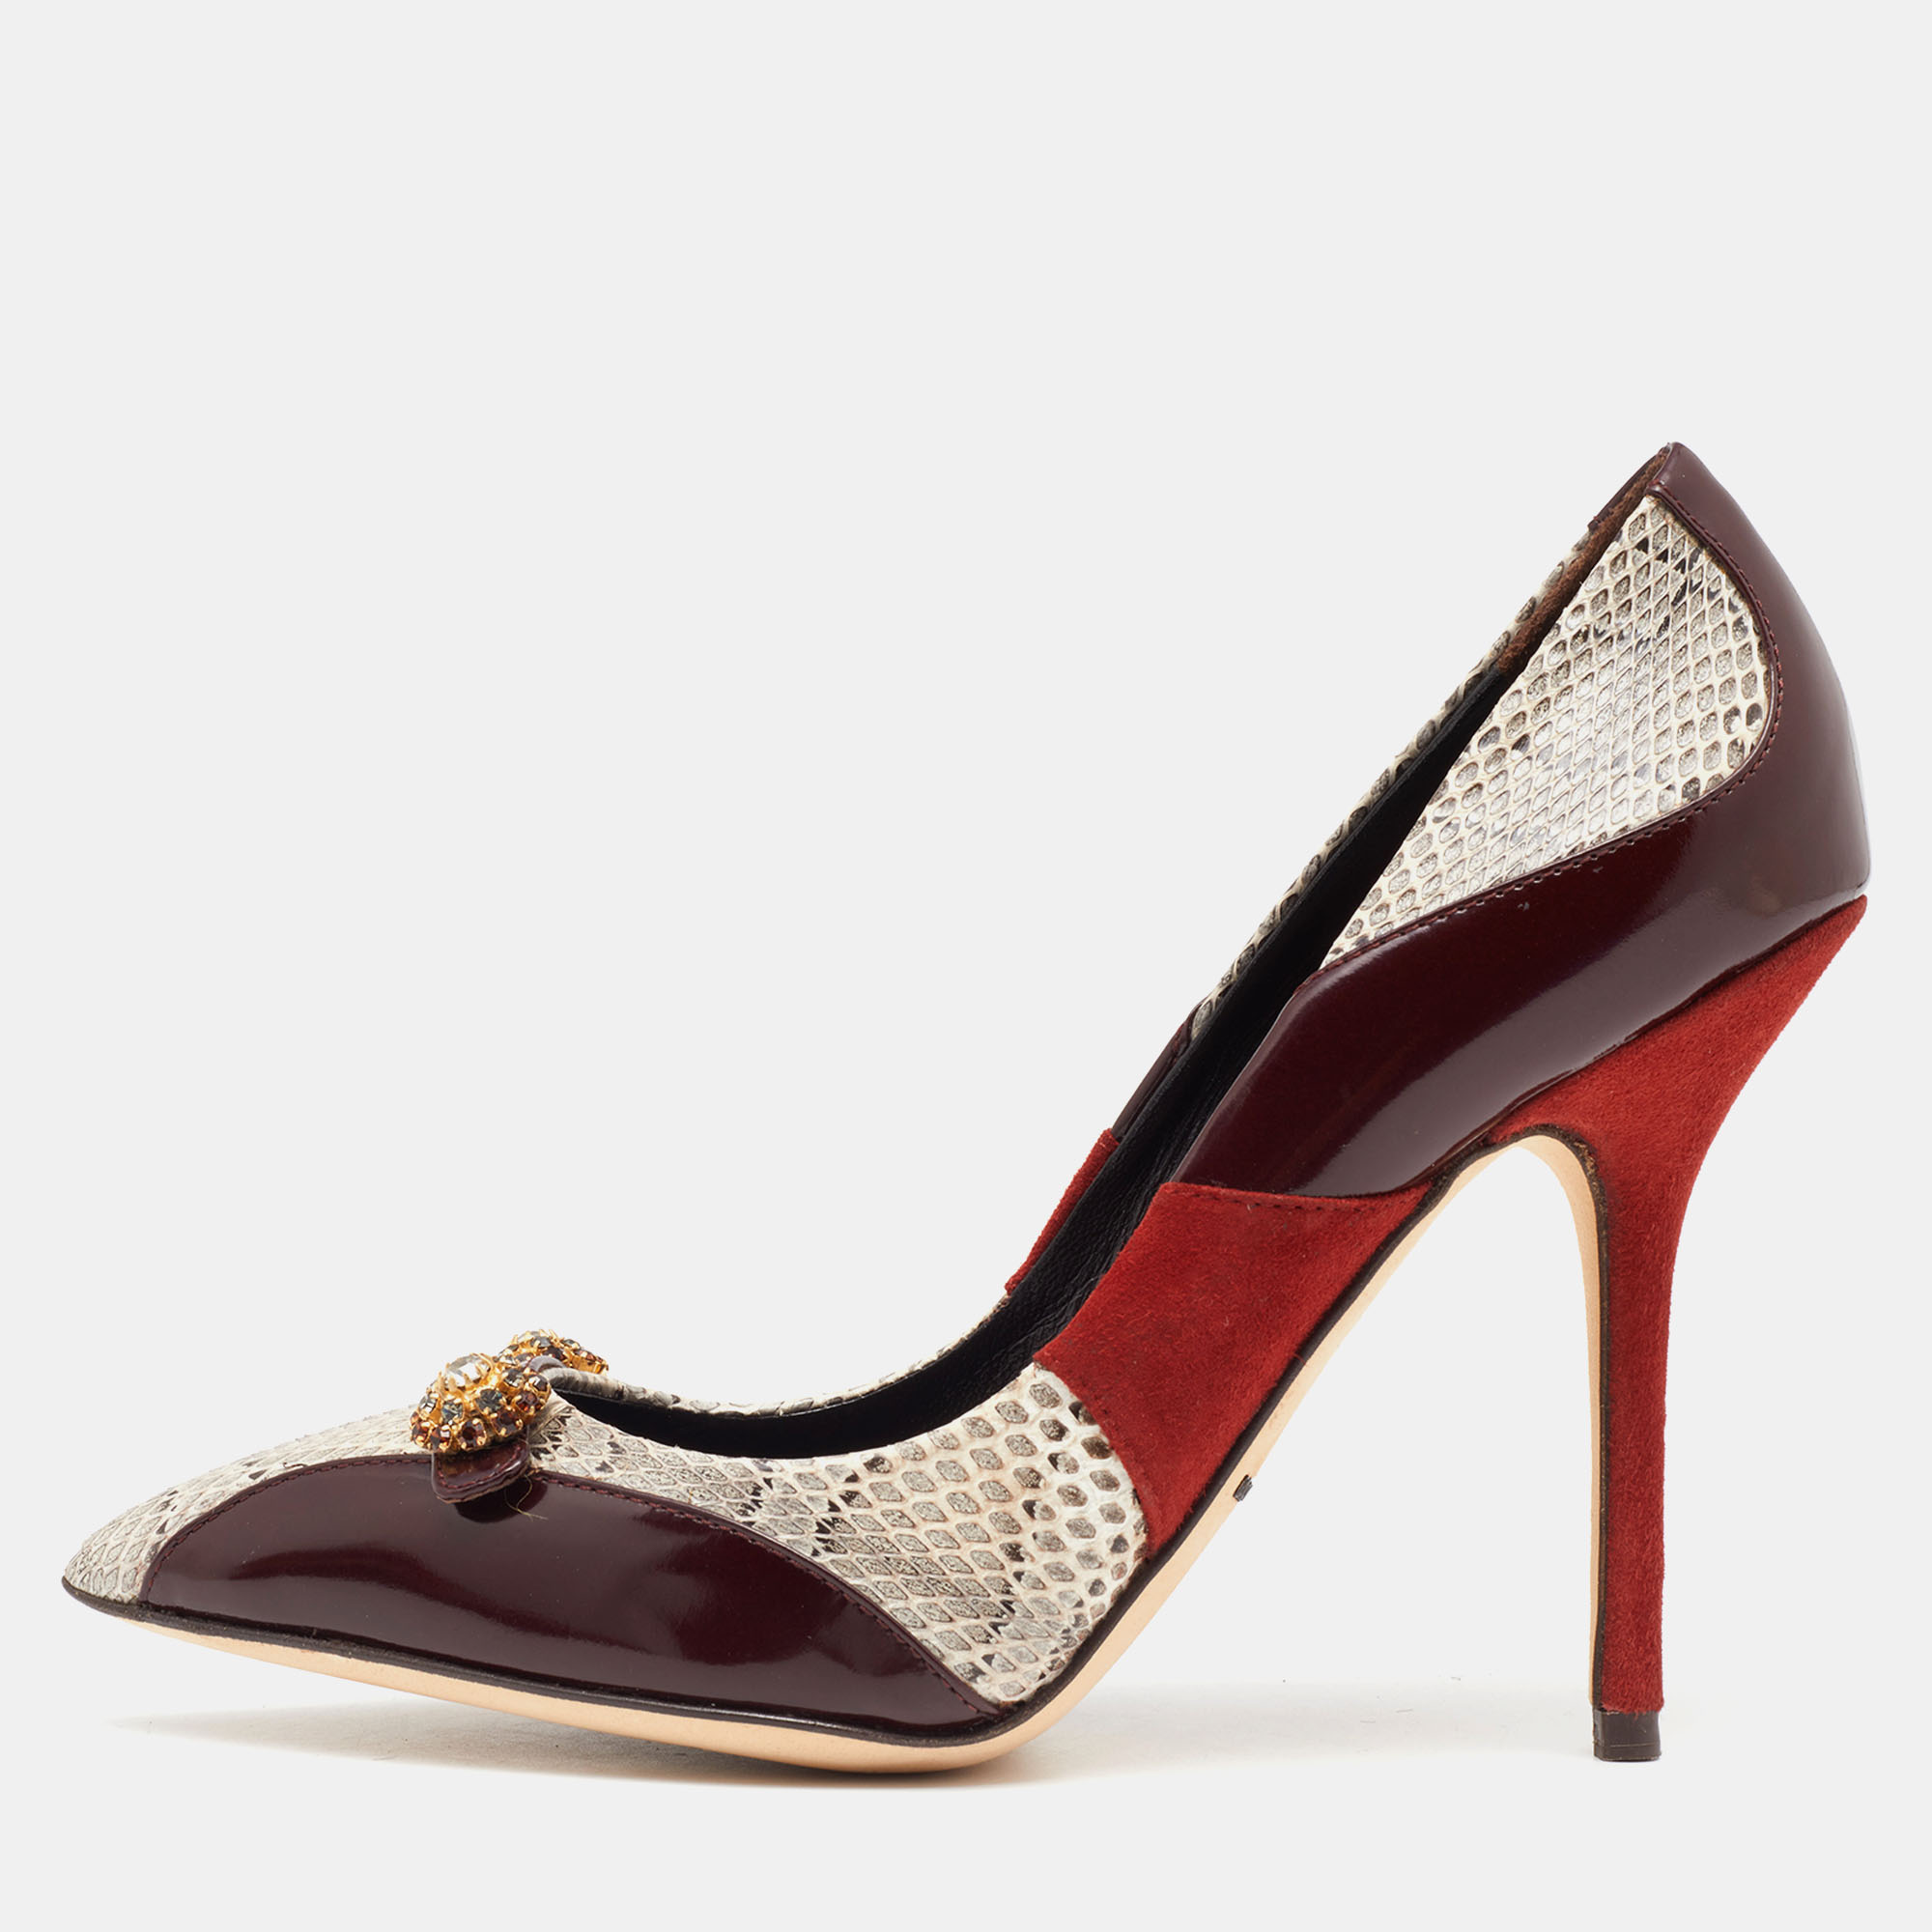 Pre-owned Dolce & Gabbana Tricolor Suede And Watersnake Pointed Toe Pumps Size 36 In Burgundy